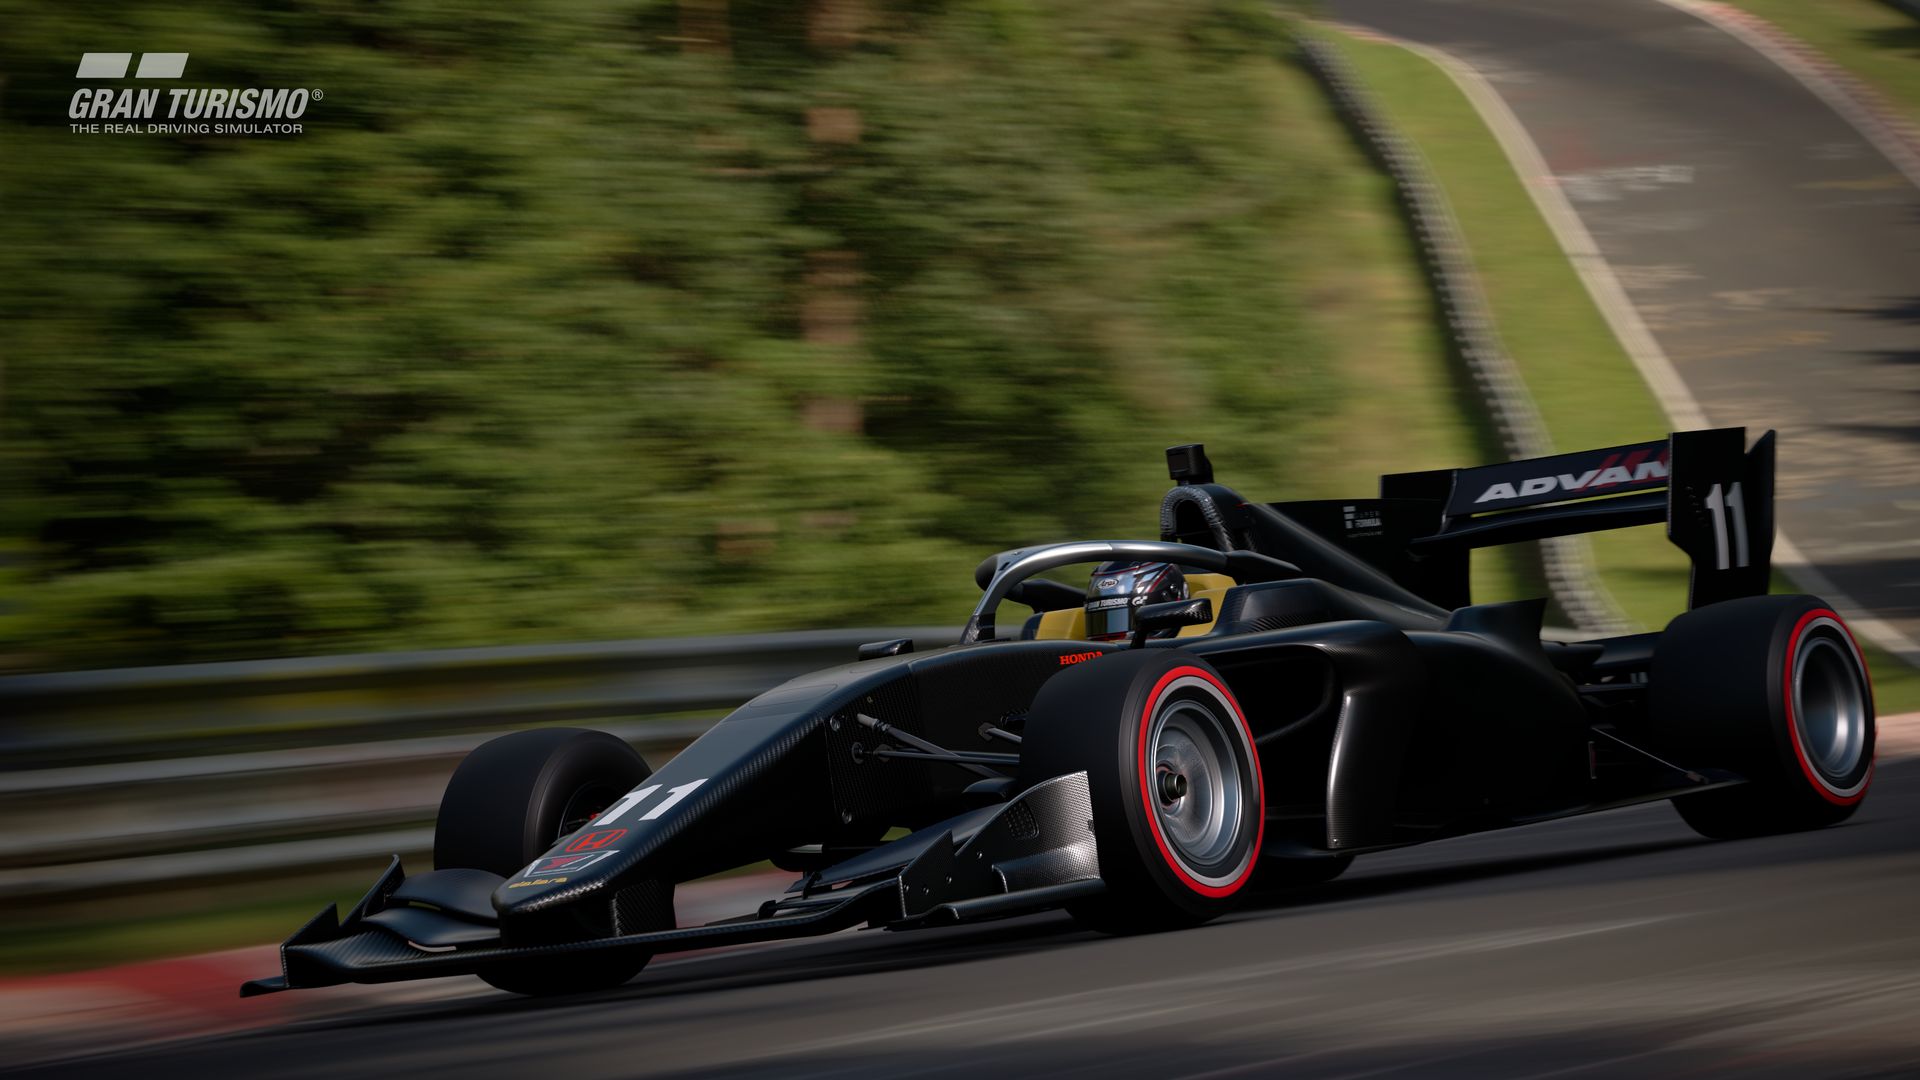 Gran Turismo 7 Update 1.36 for August 7 Comes With New Cars and Fixes